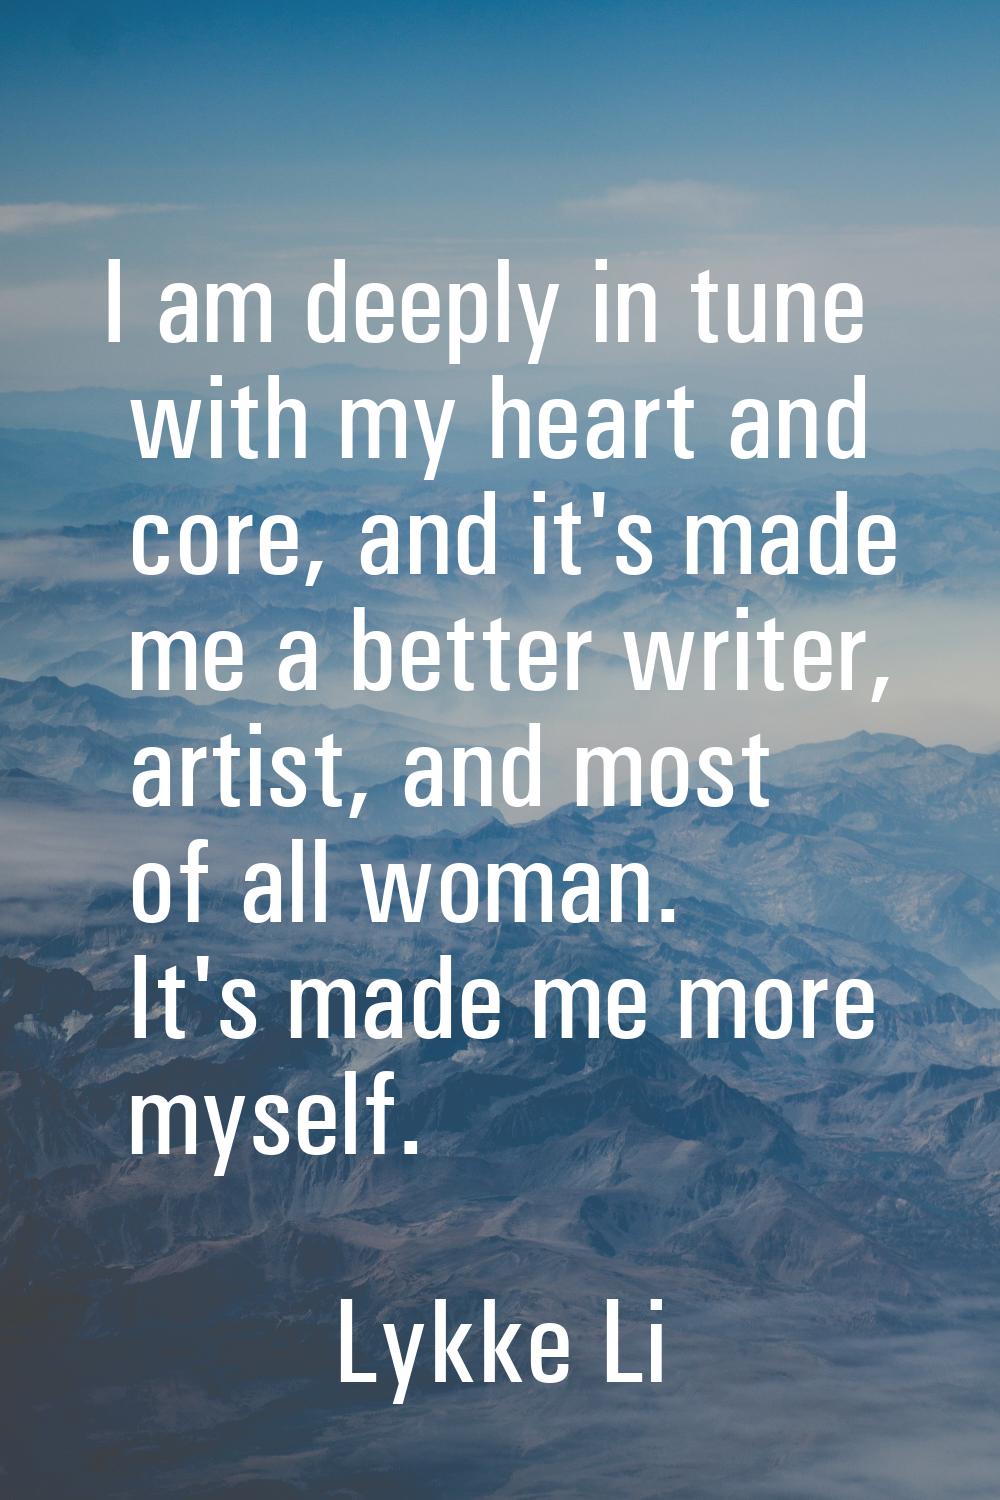 I am deeply in tune with my heart and core, and it's made me a better writer, artist, and most of a